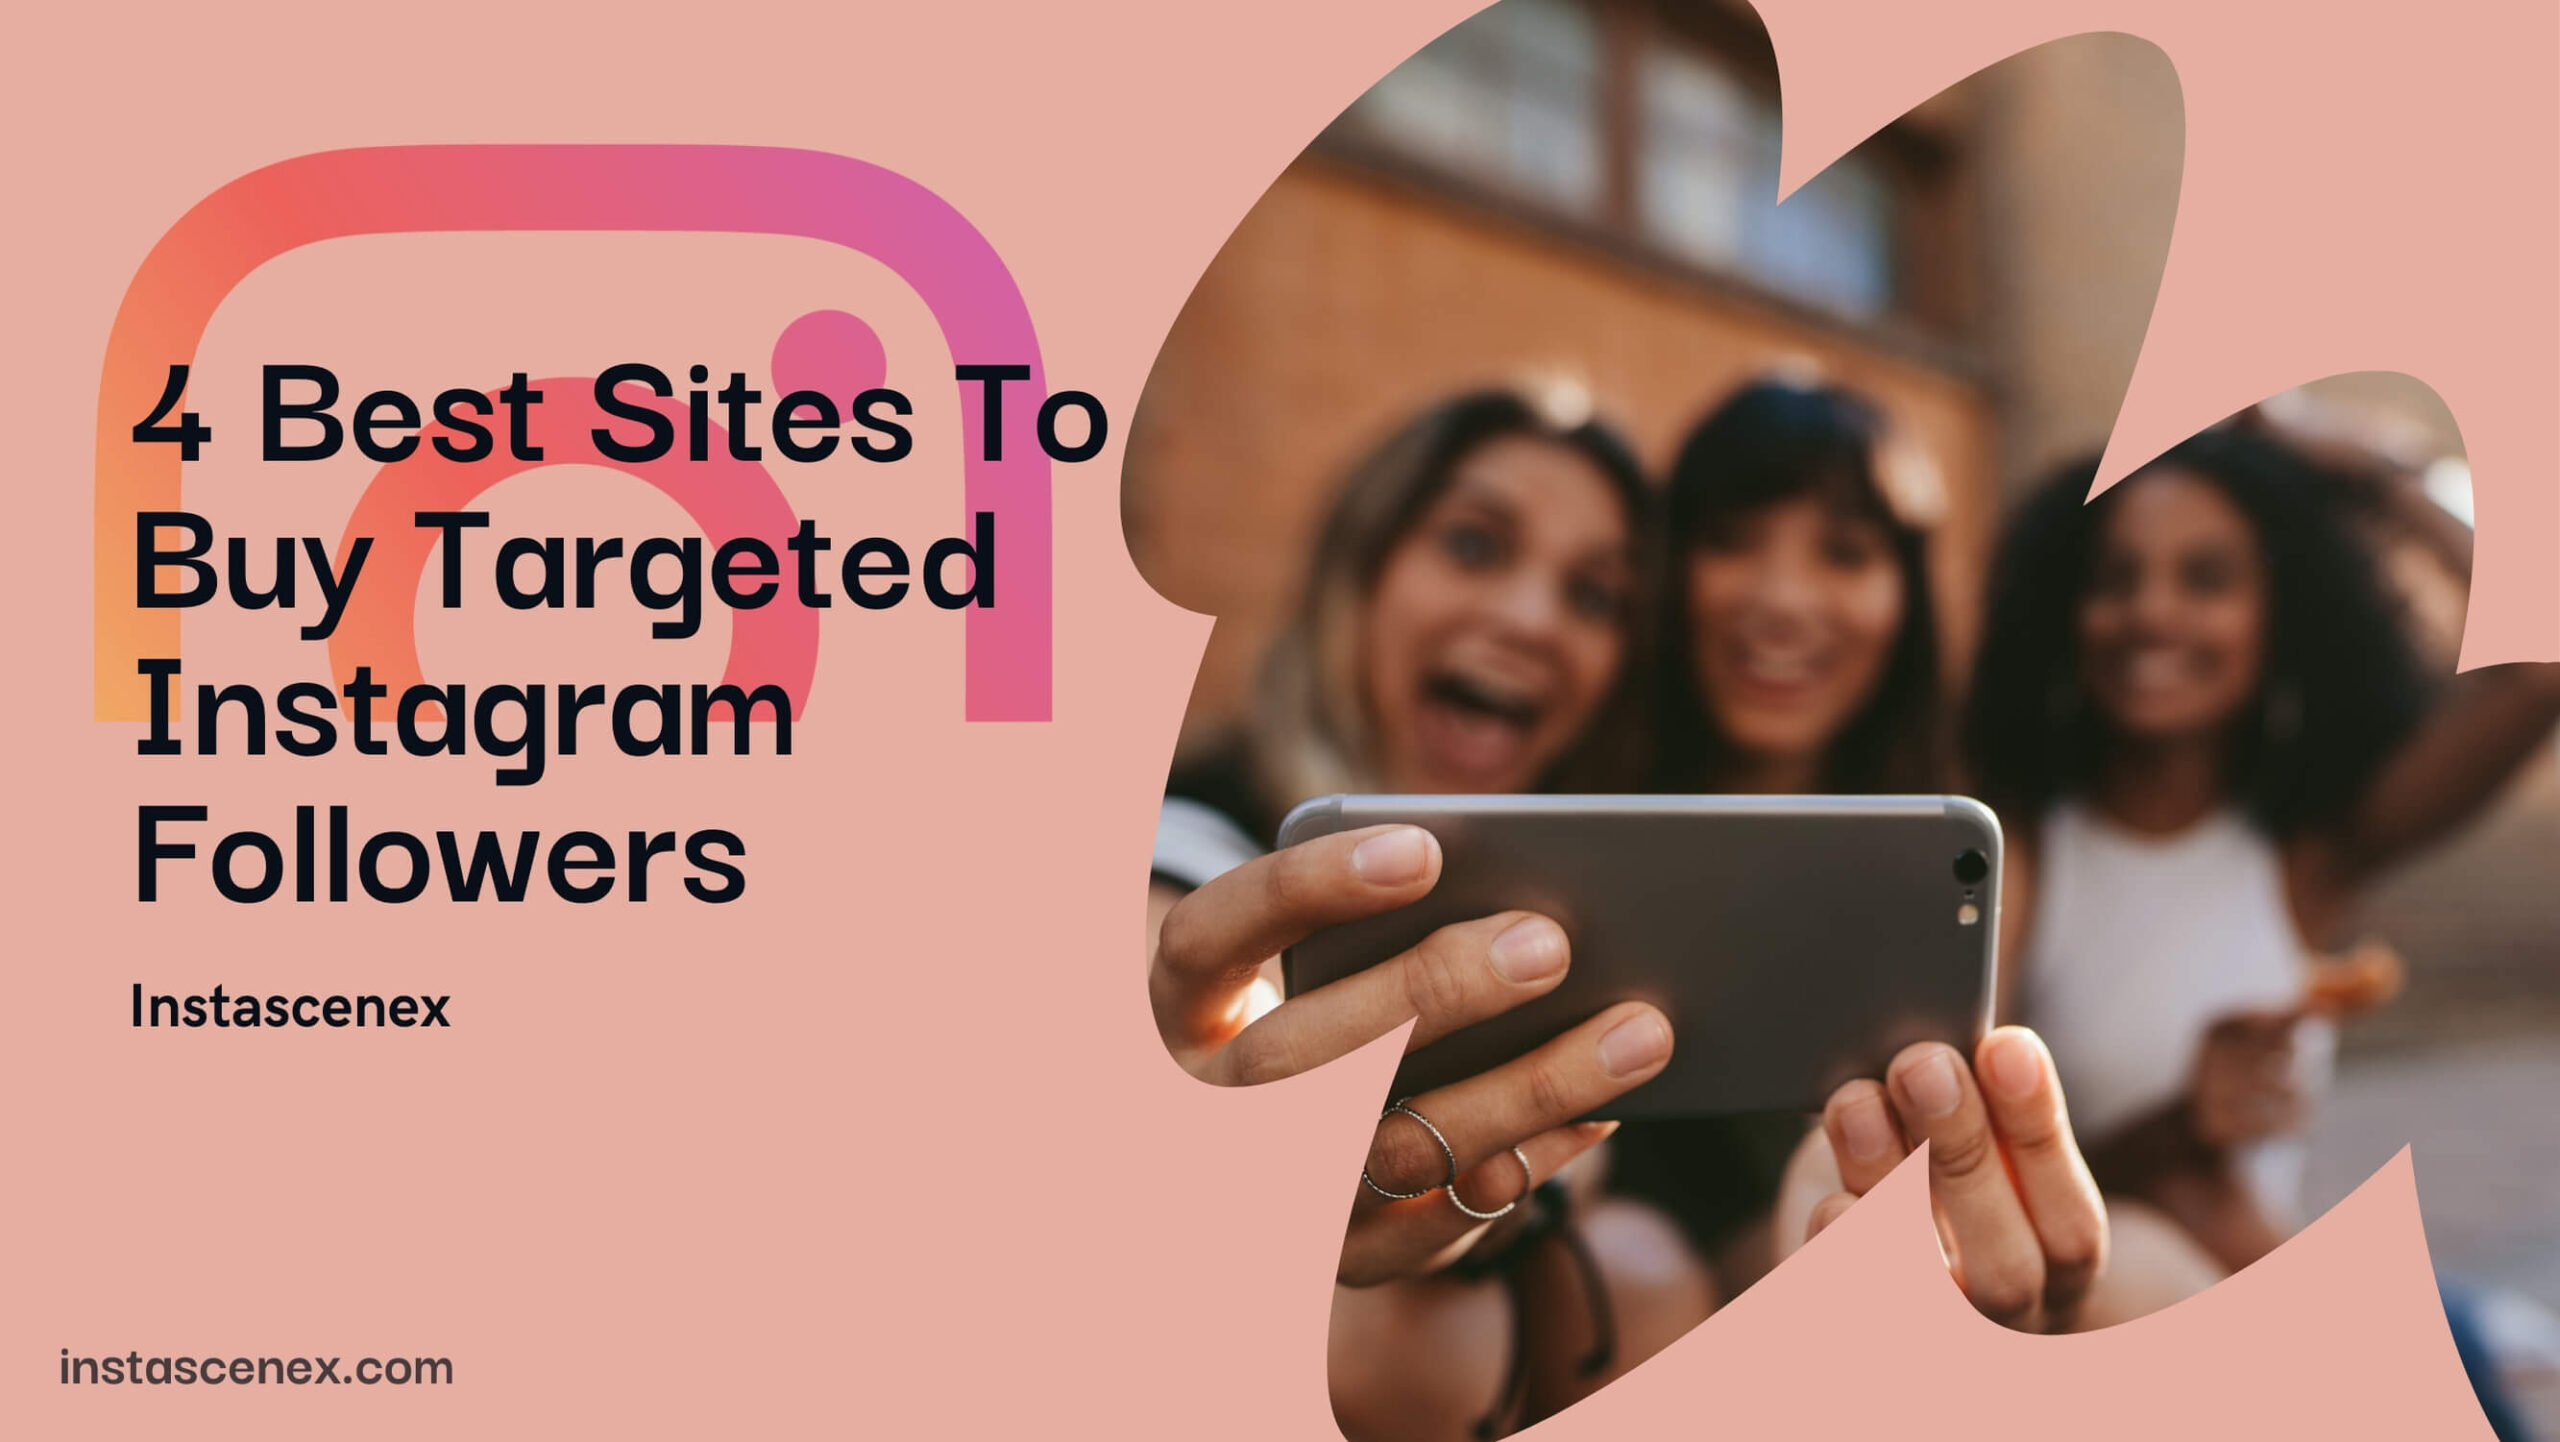 4 Best Sites To Buy Targeted Instagram Followers